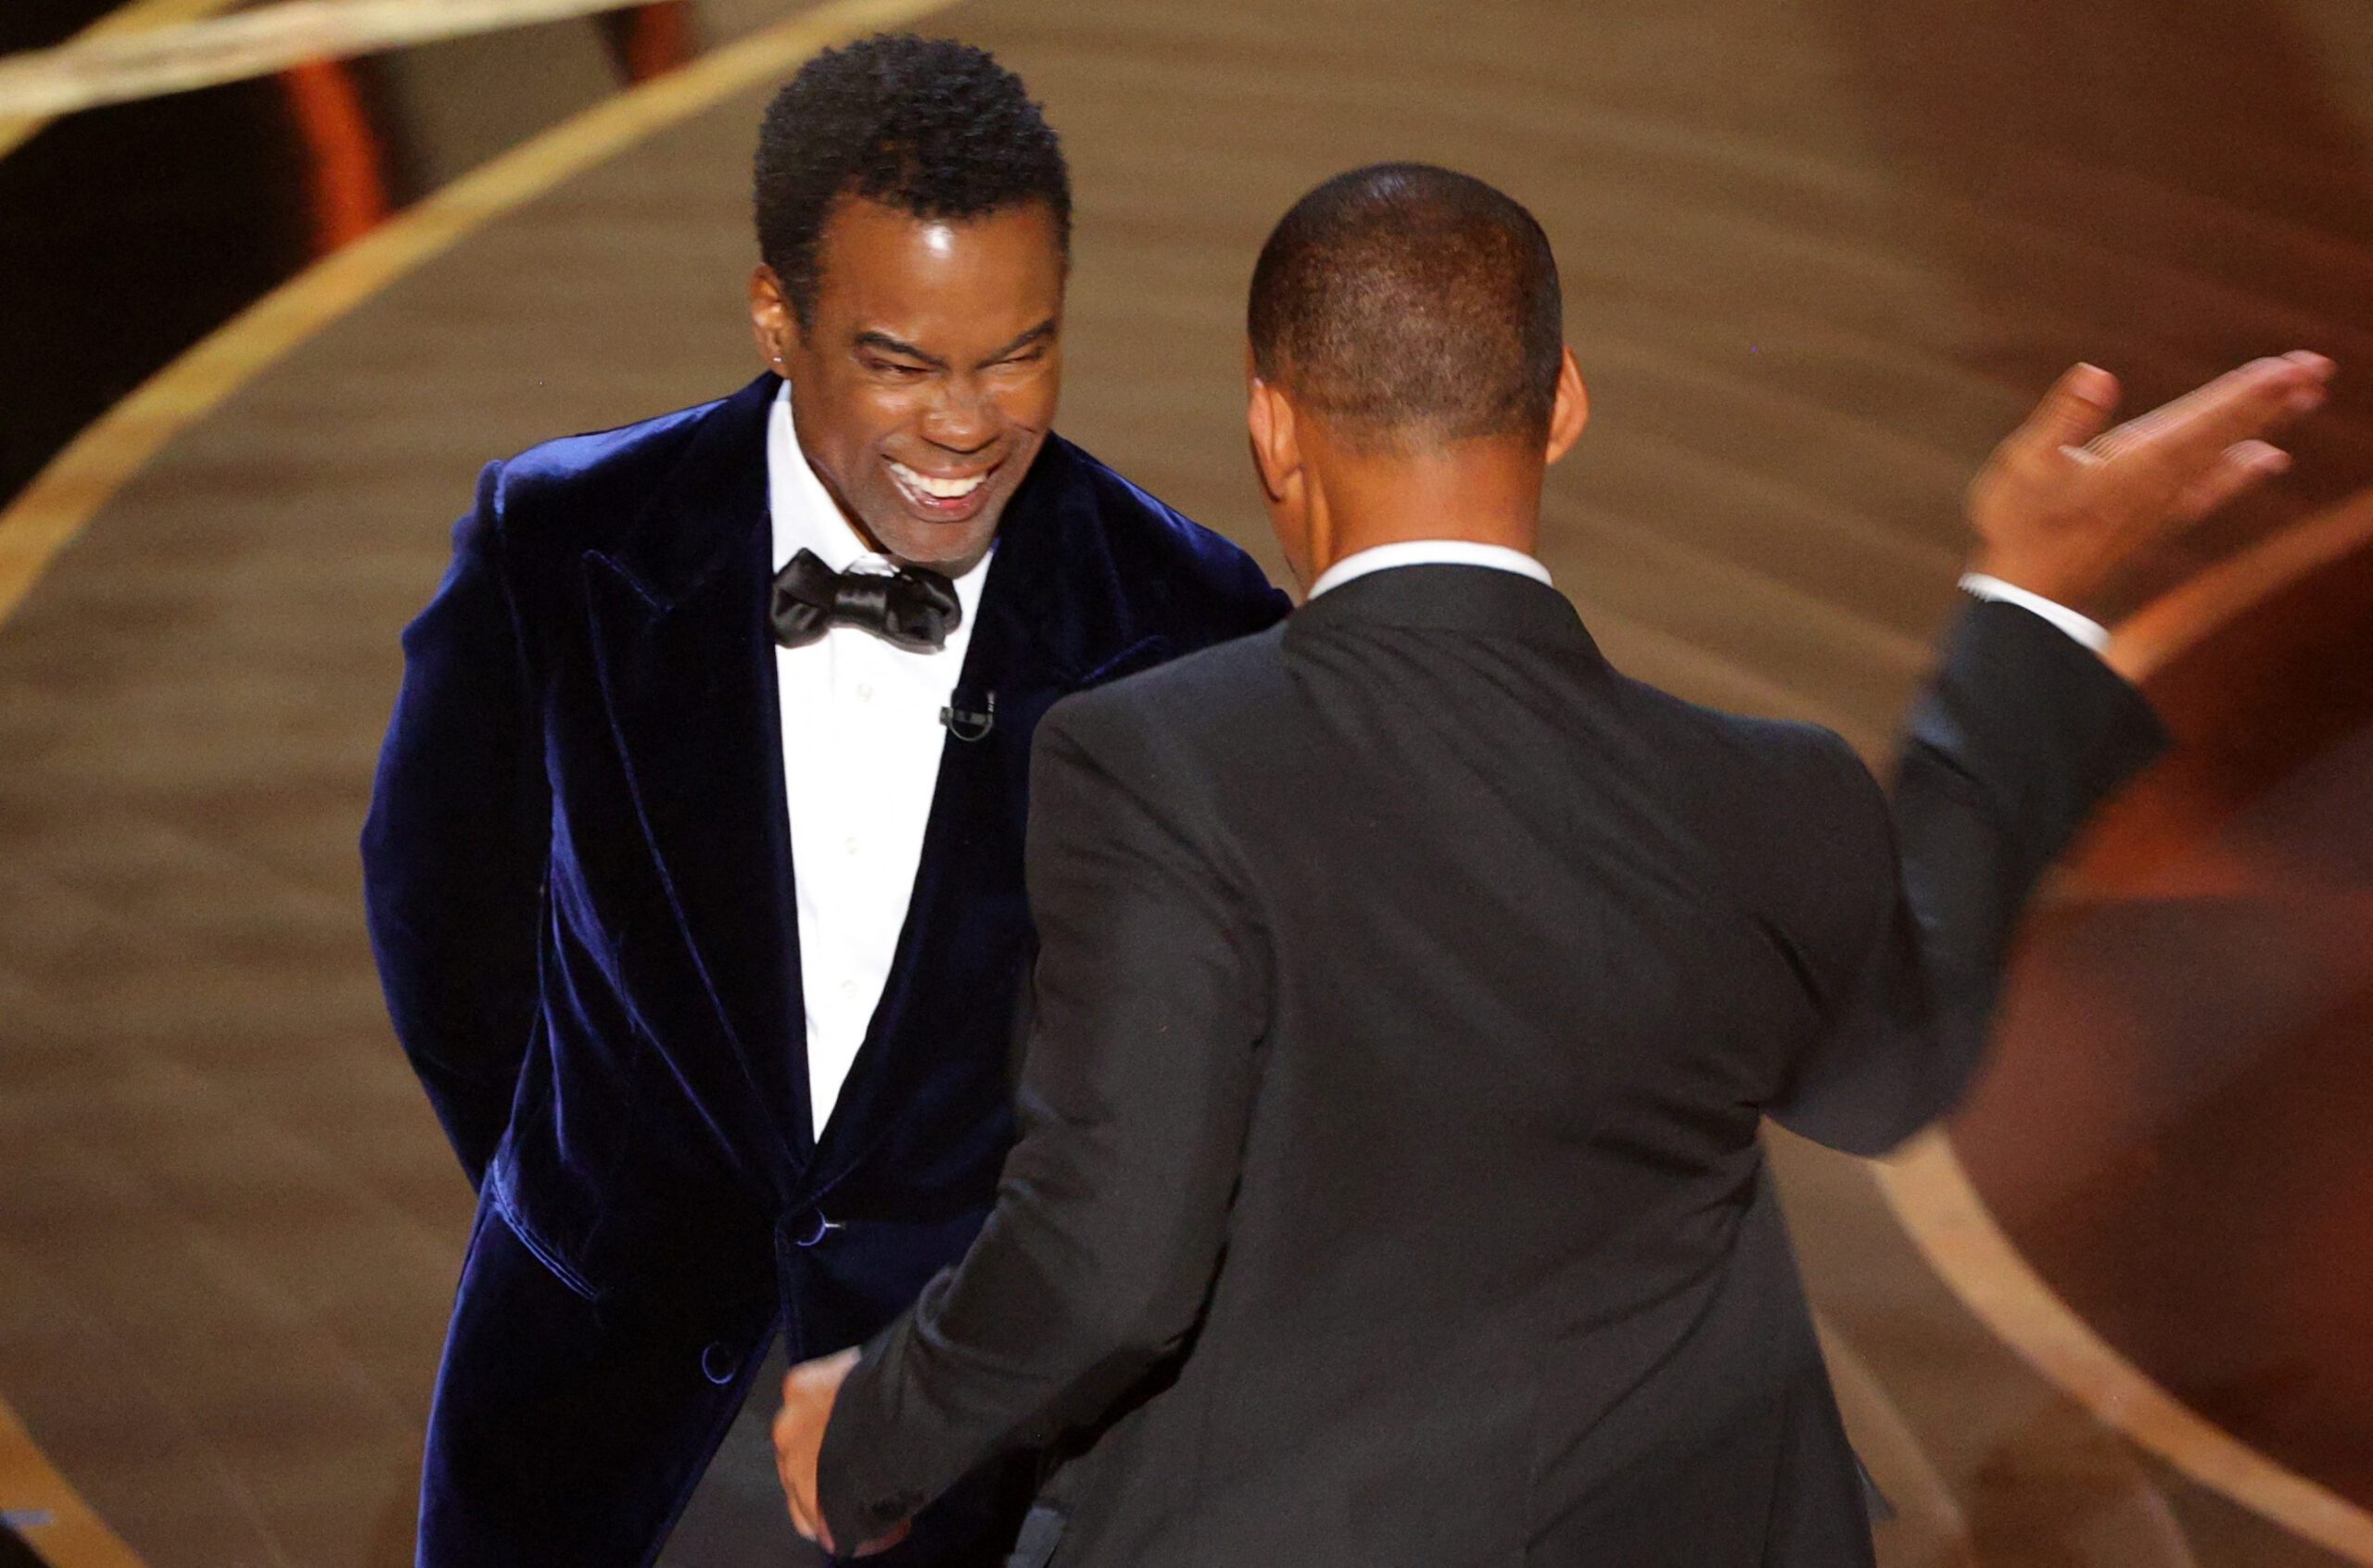 Will Smith appeared to hit Chris Rock at the Oscars.